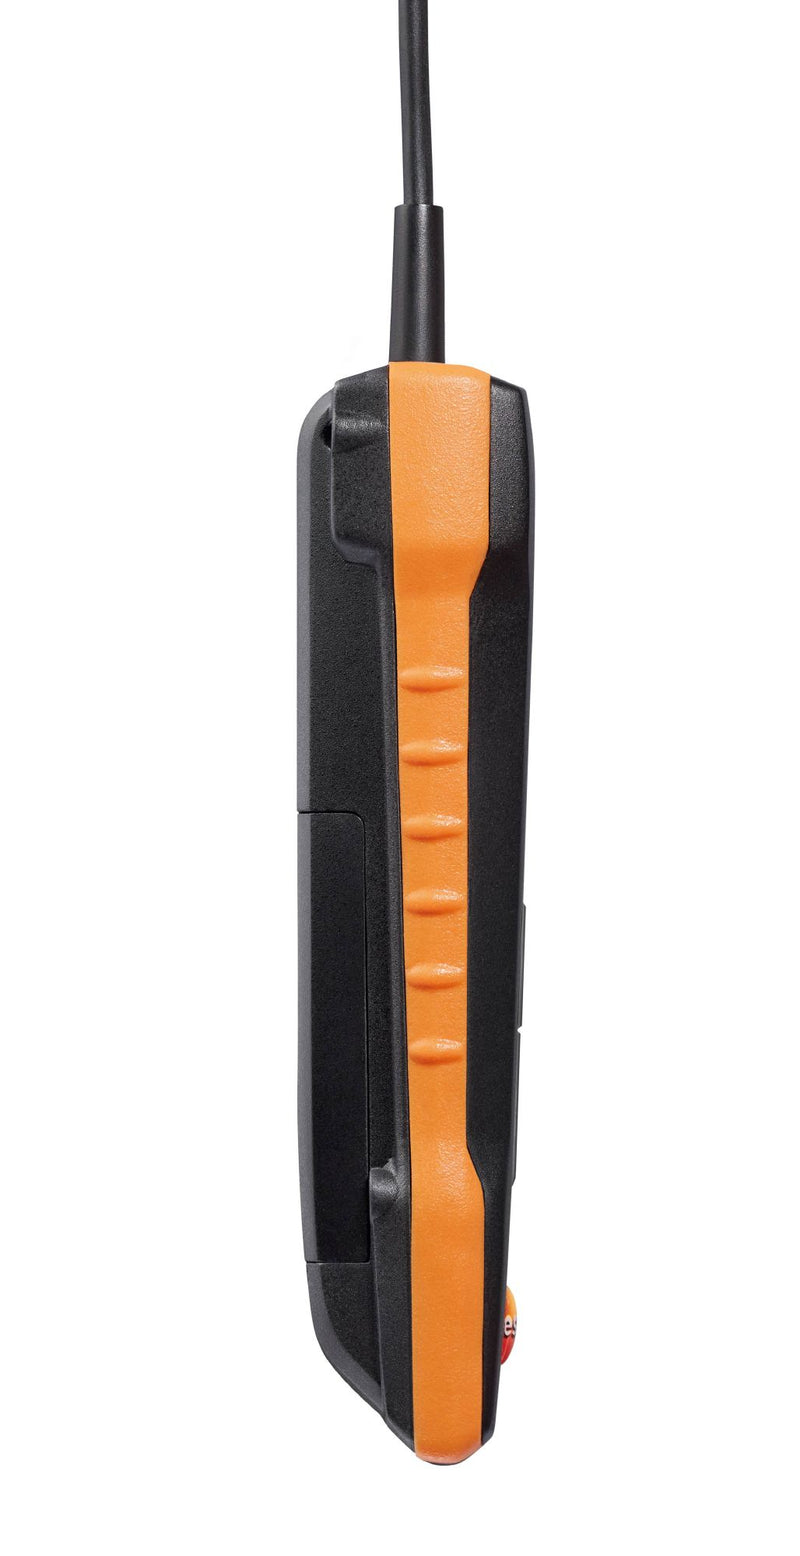 Testo 416 - Digital 16 mm Vane Anemometer with App Connection